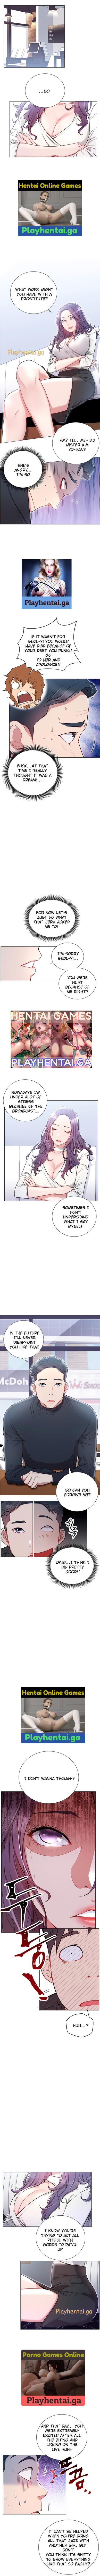 Handjobs LIVE WITH : DO YOU WANT TO DO IT Ch. 7 Softcore - Page 8